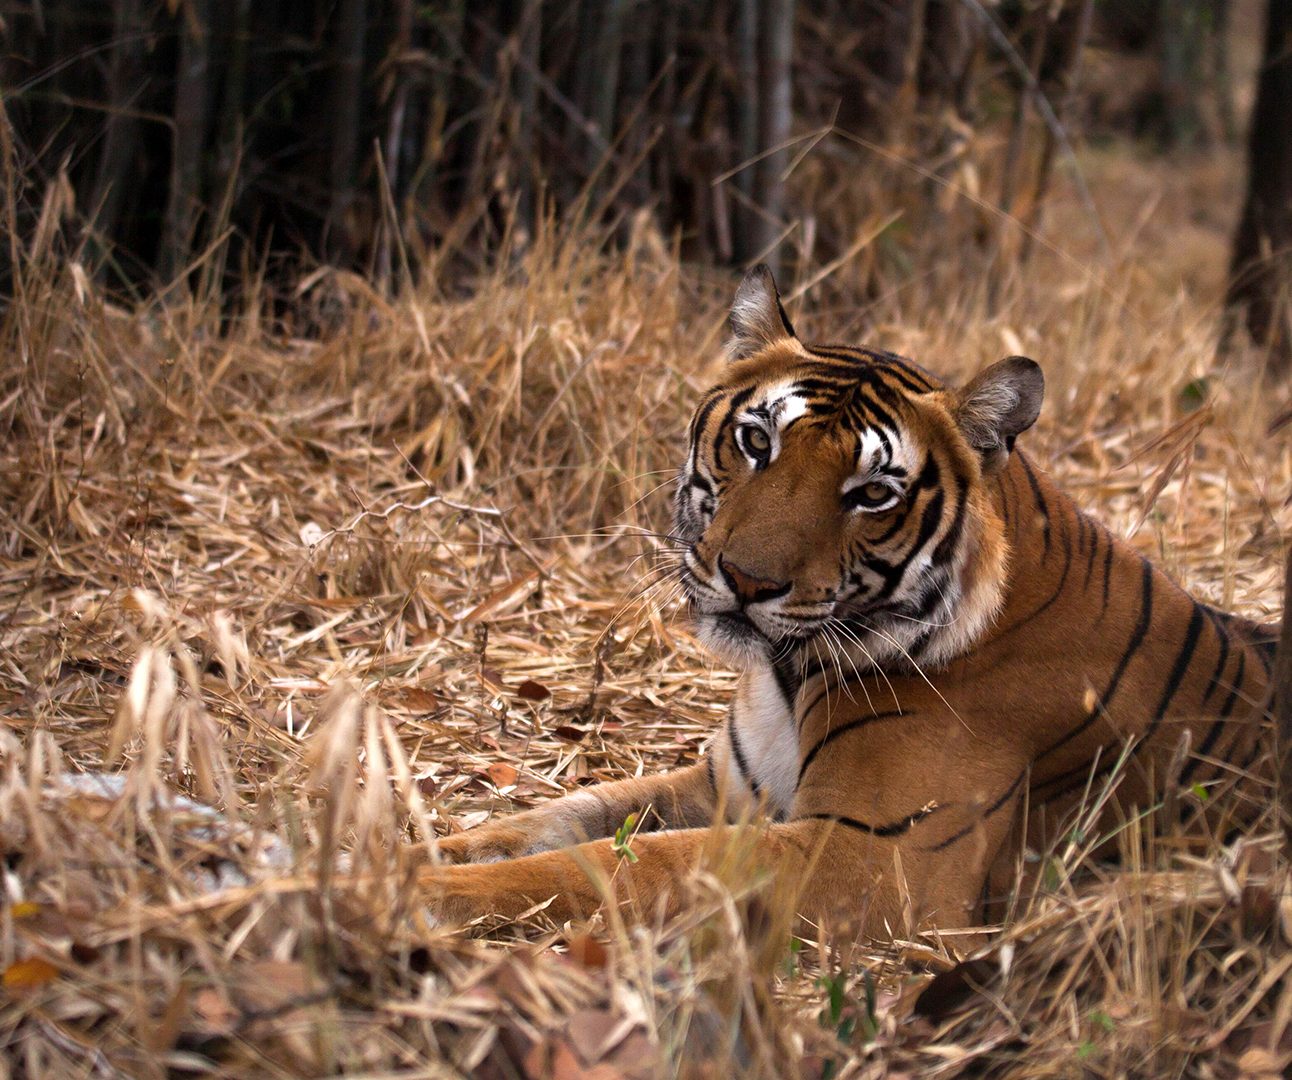 A photo of a tiger sitting in long dried grass in a forest